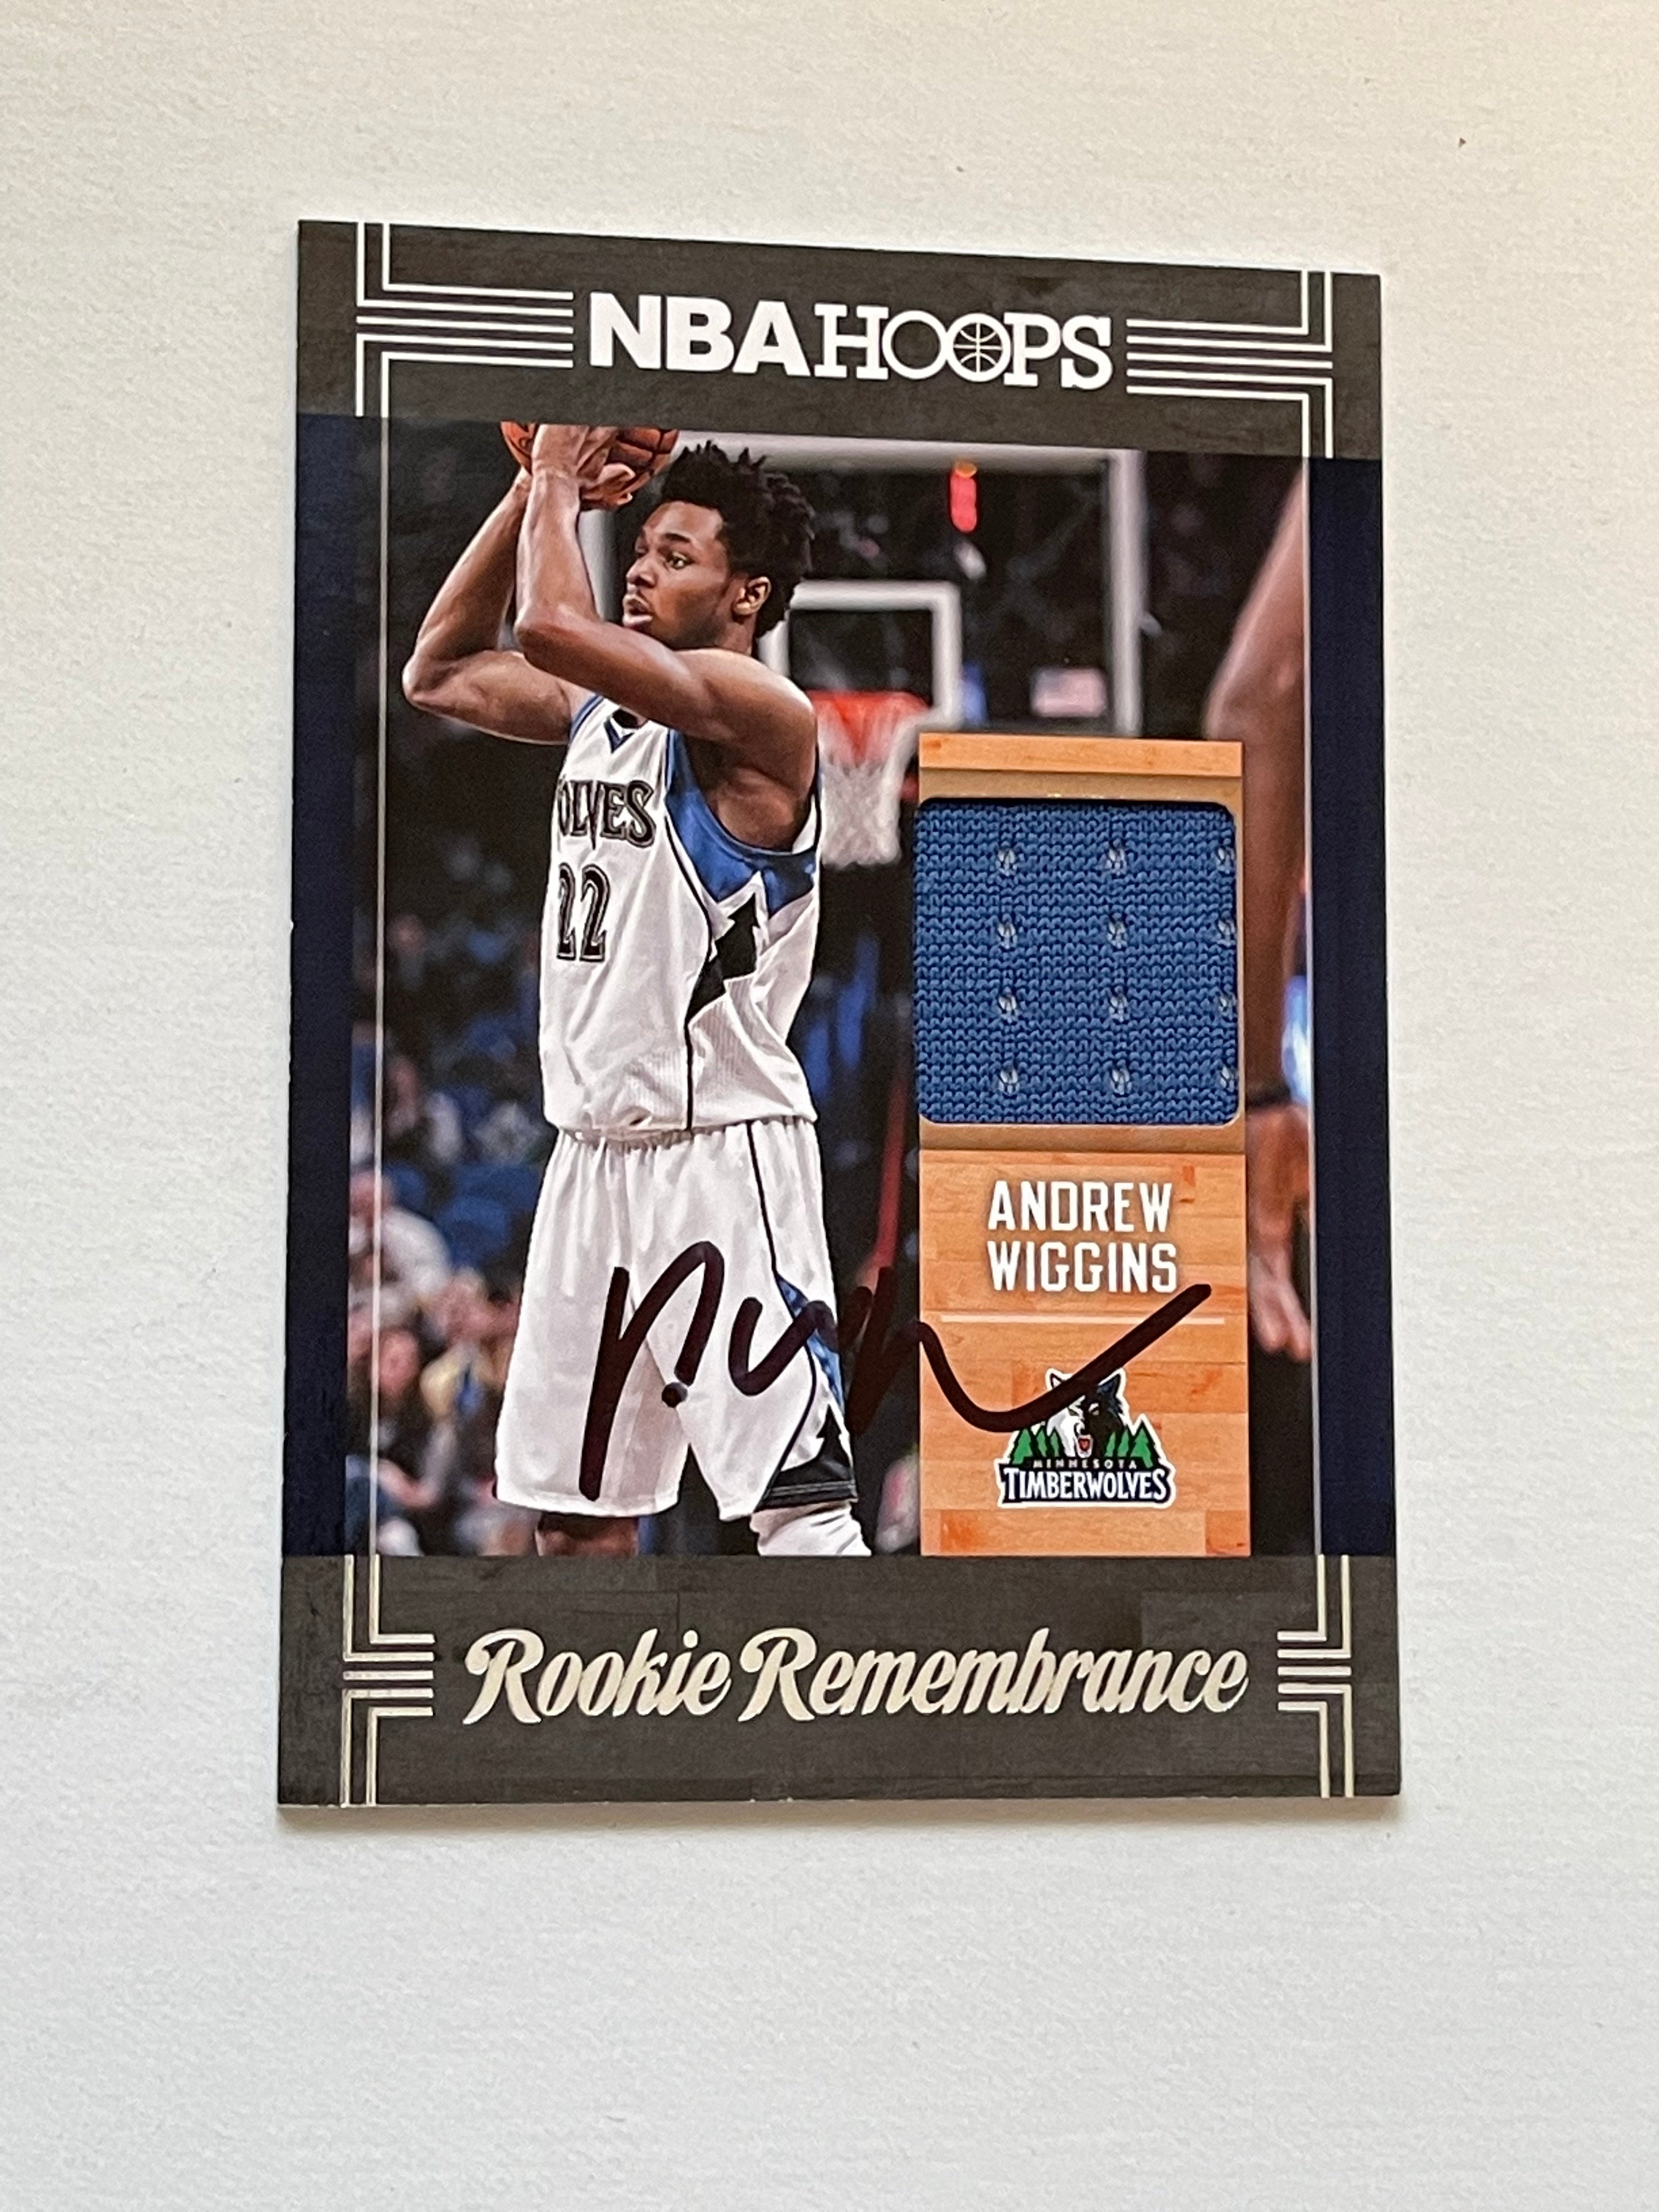 Andrew Wiggins Hoops rookie Remembrance autograph memorabilia insert card 2017-18